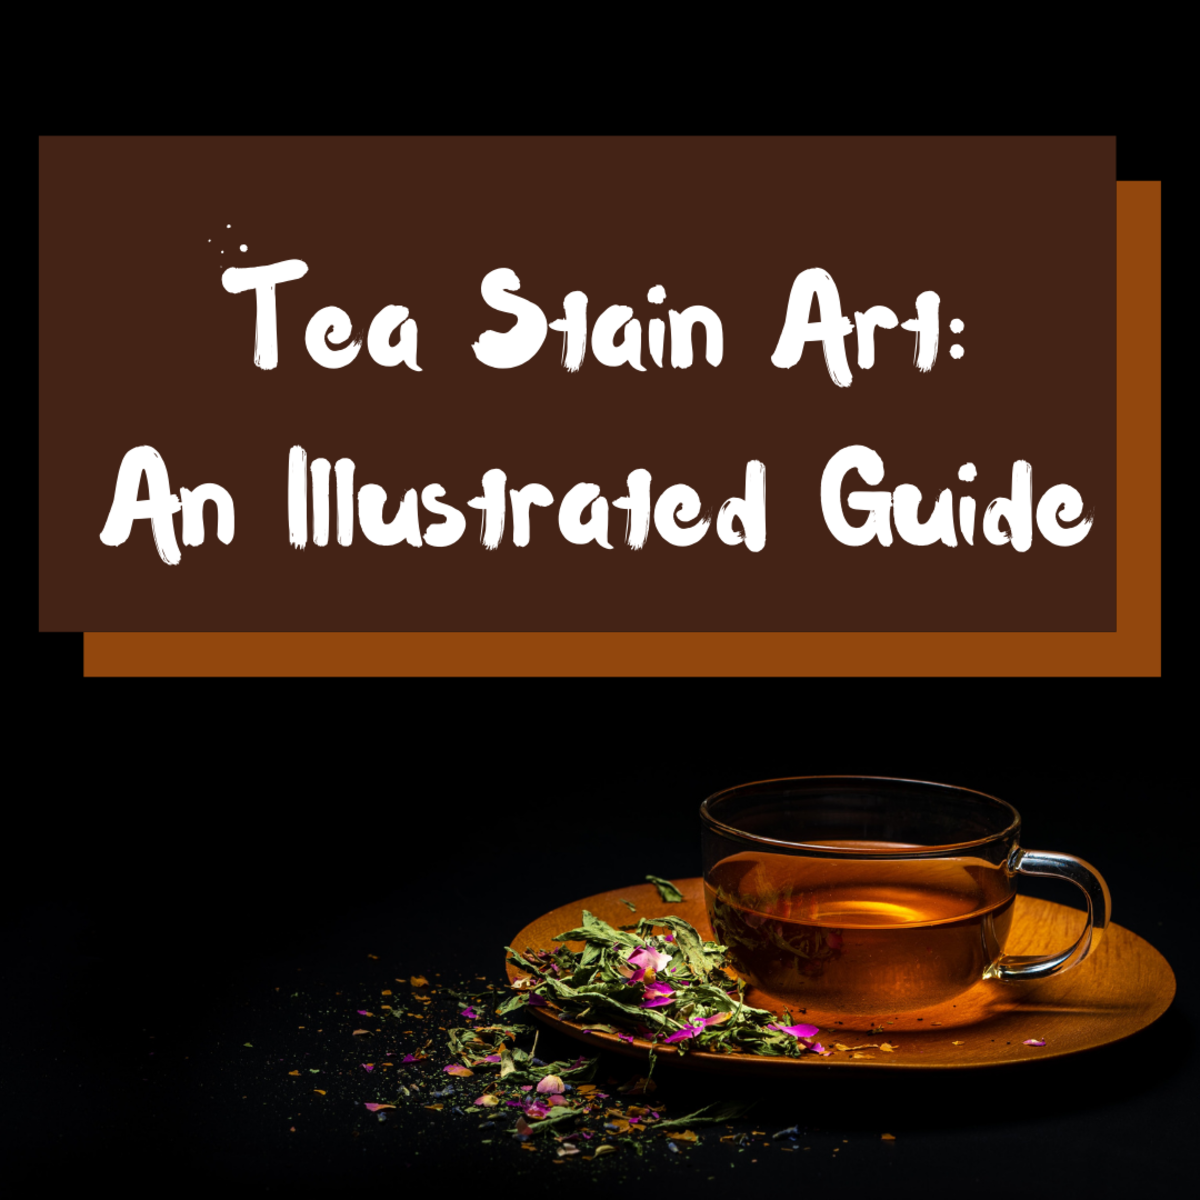 Learn how to create art from tea stains on paper. This article guides you through the process and gives creative ideas.